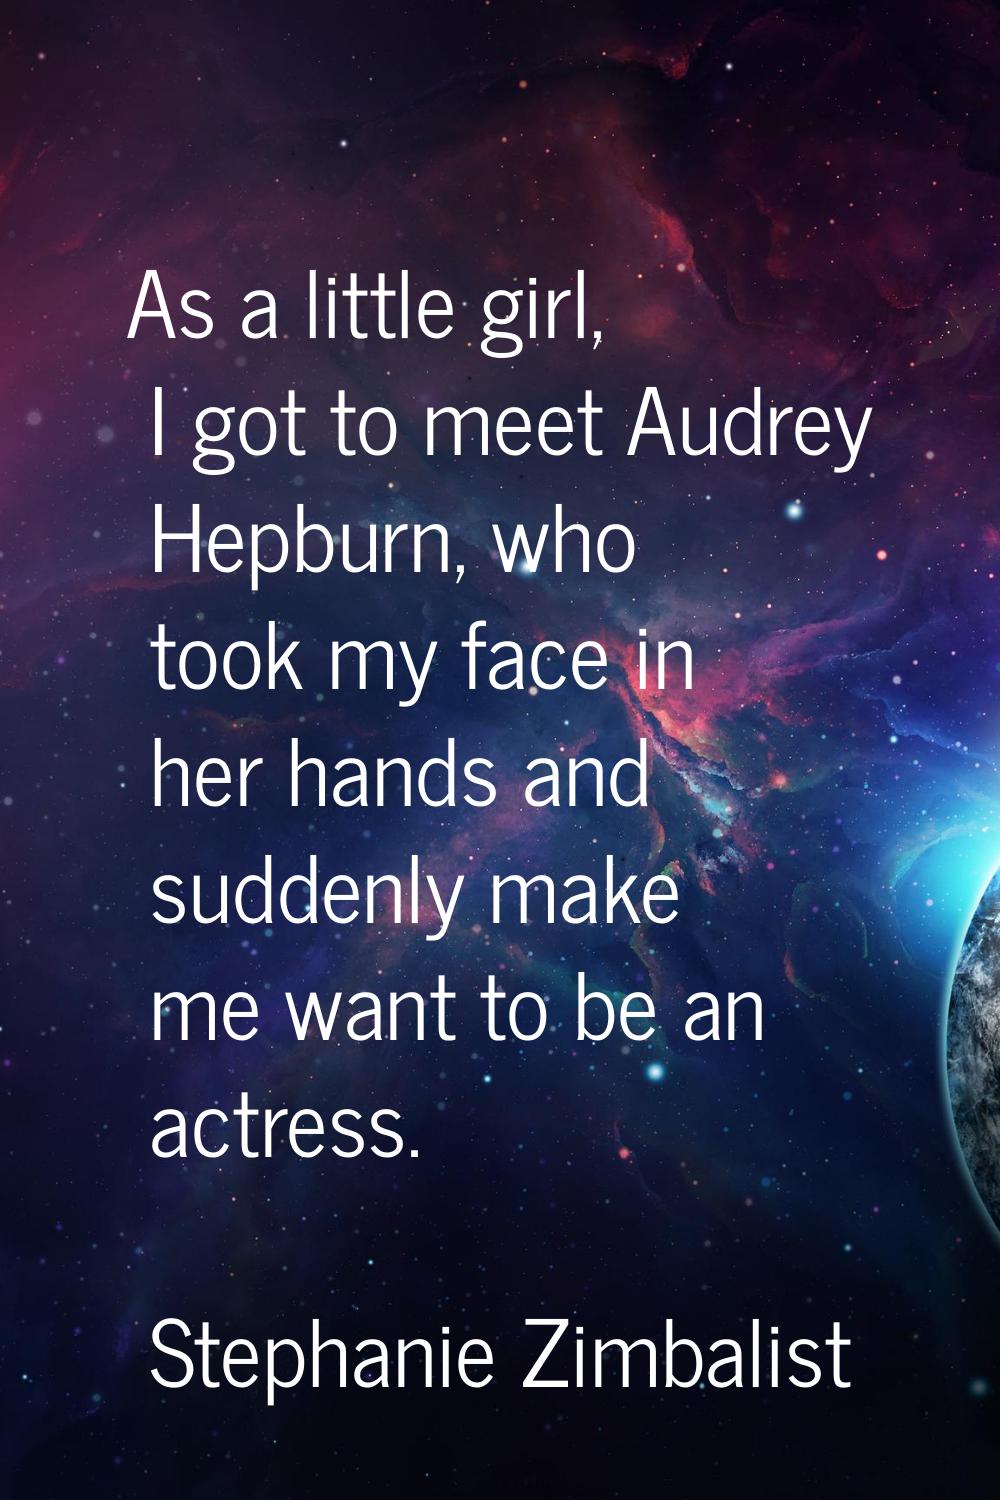 As a little girl, I got to meet Audrey Hepburn, who took my face in her hands and suddenly make me 